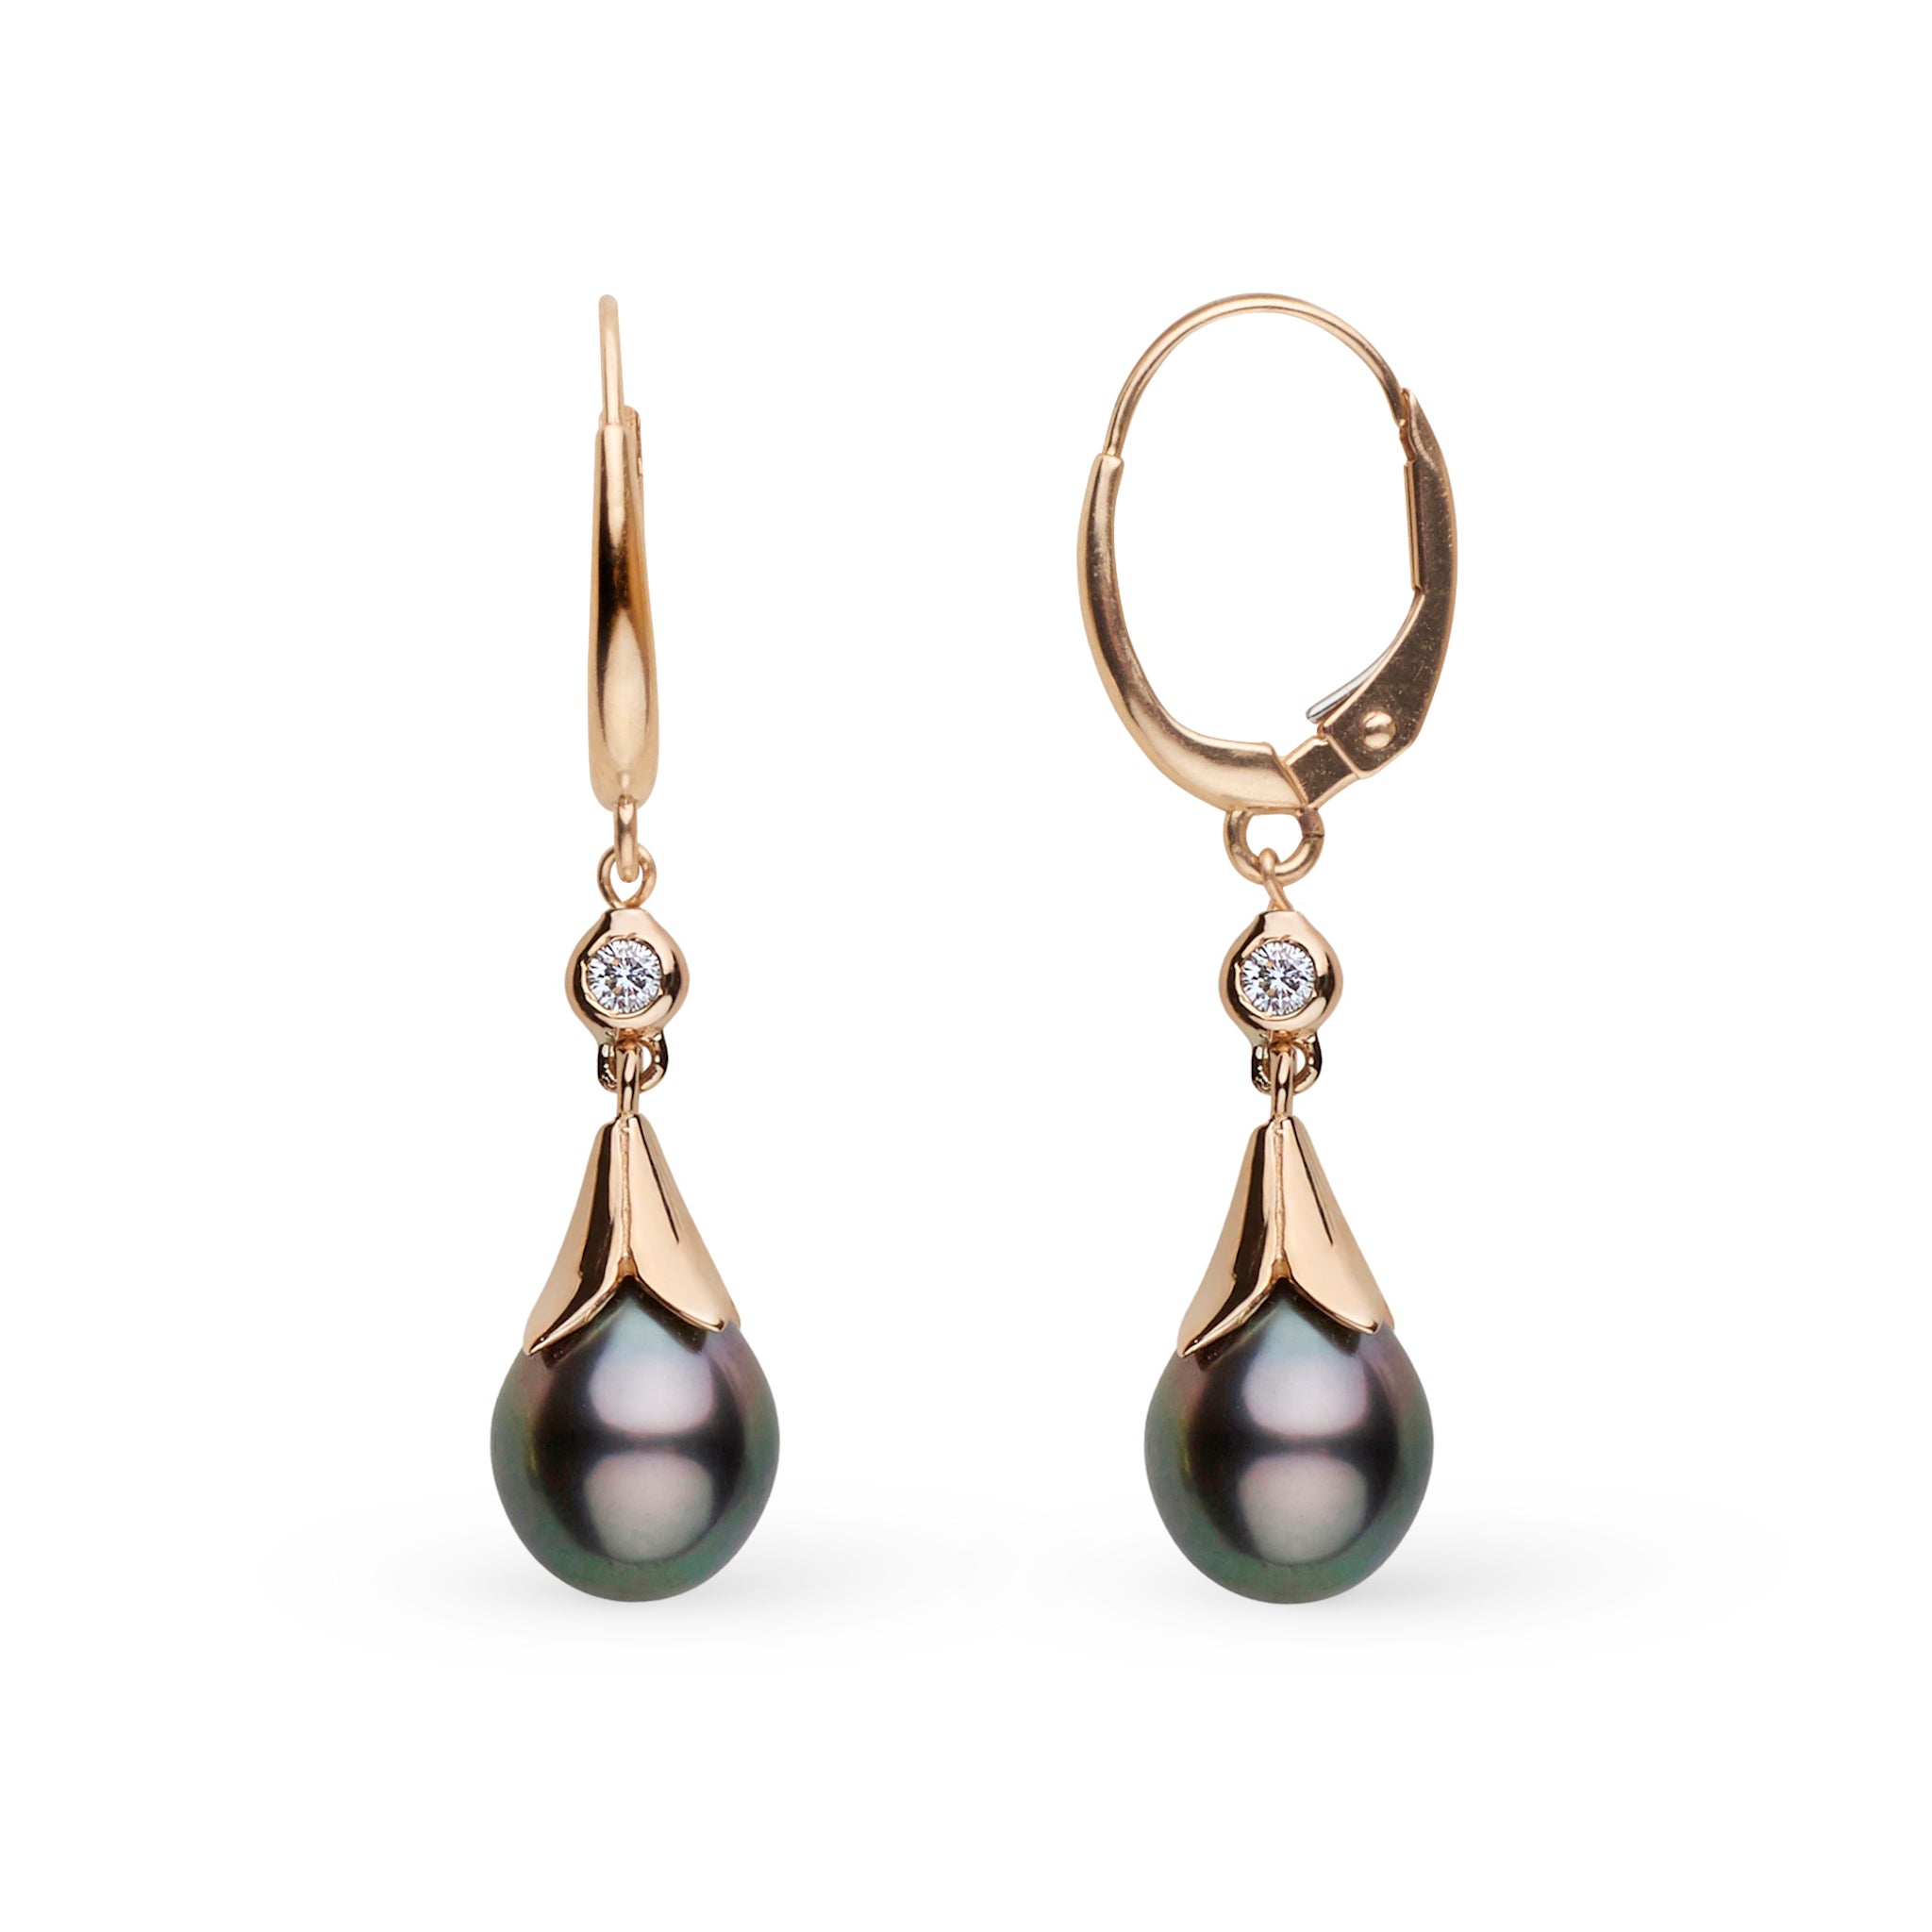 Lilium Collection 9.0-10.0 mm Tahitian Drop Pearl and Diamond Earrings